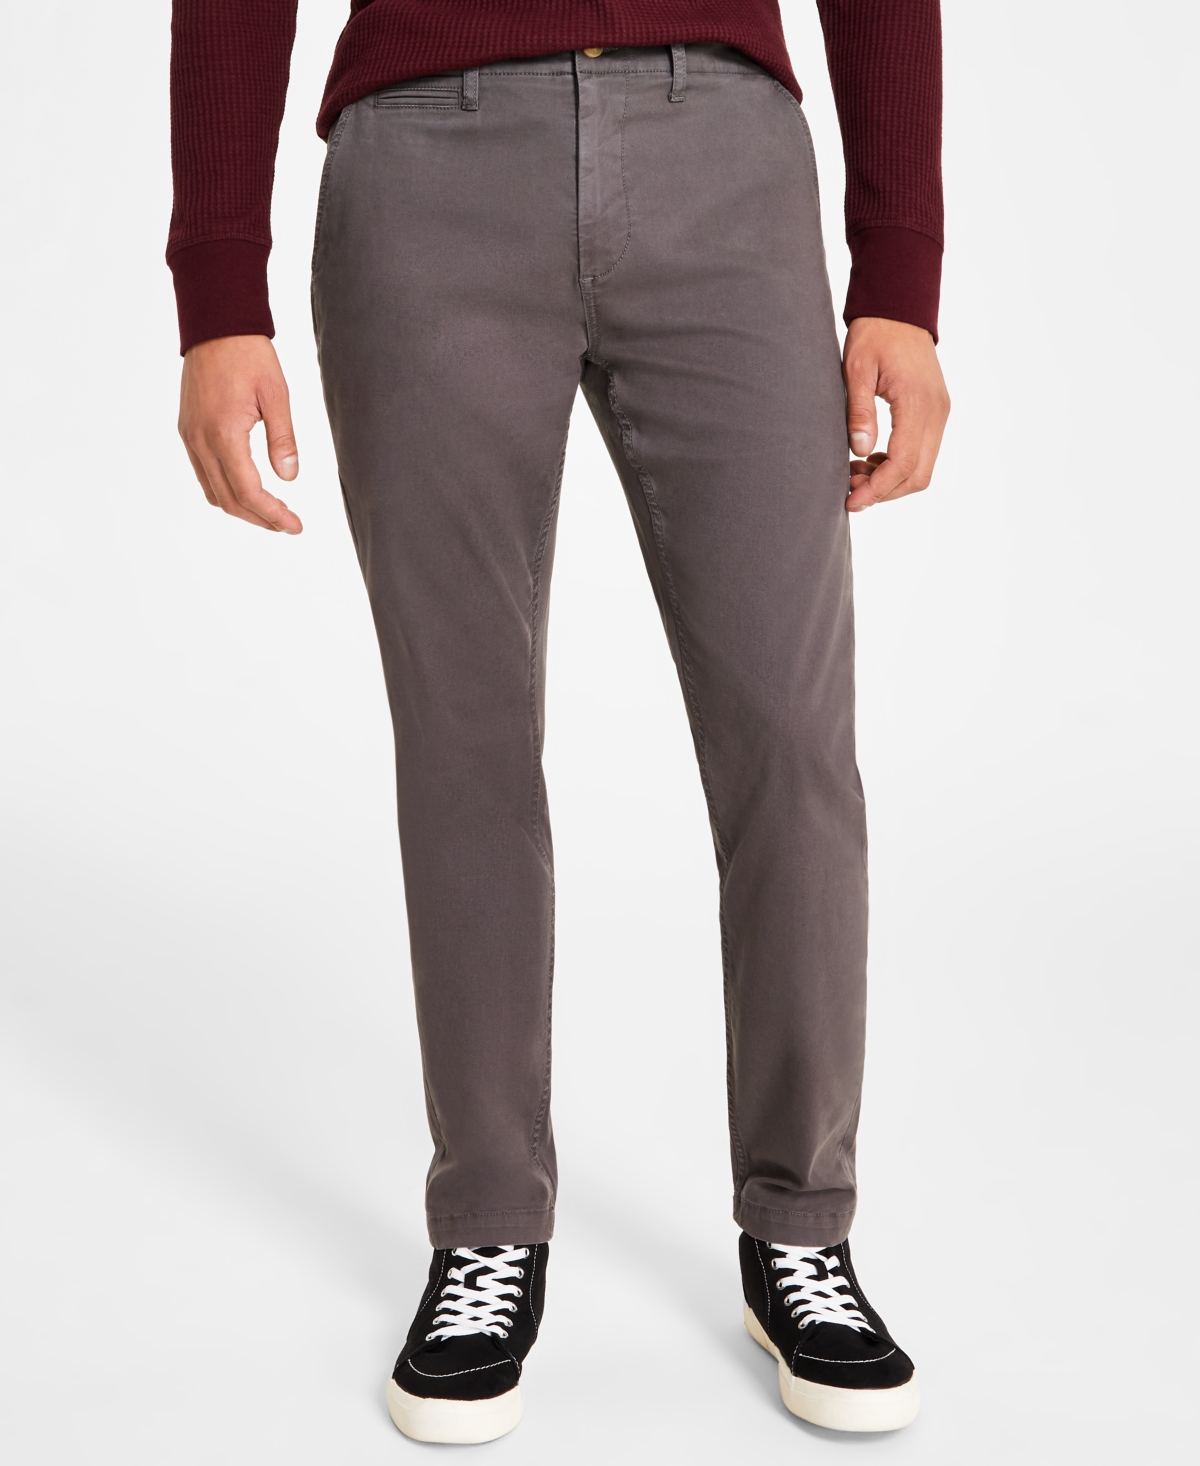 Sun + Stone Men's Articulated Jogger Pants, Created for Macy's - Macy's